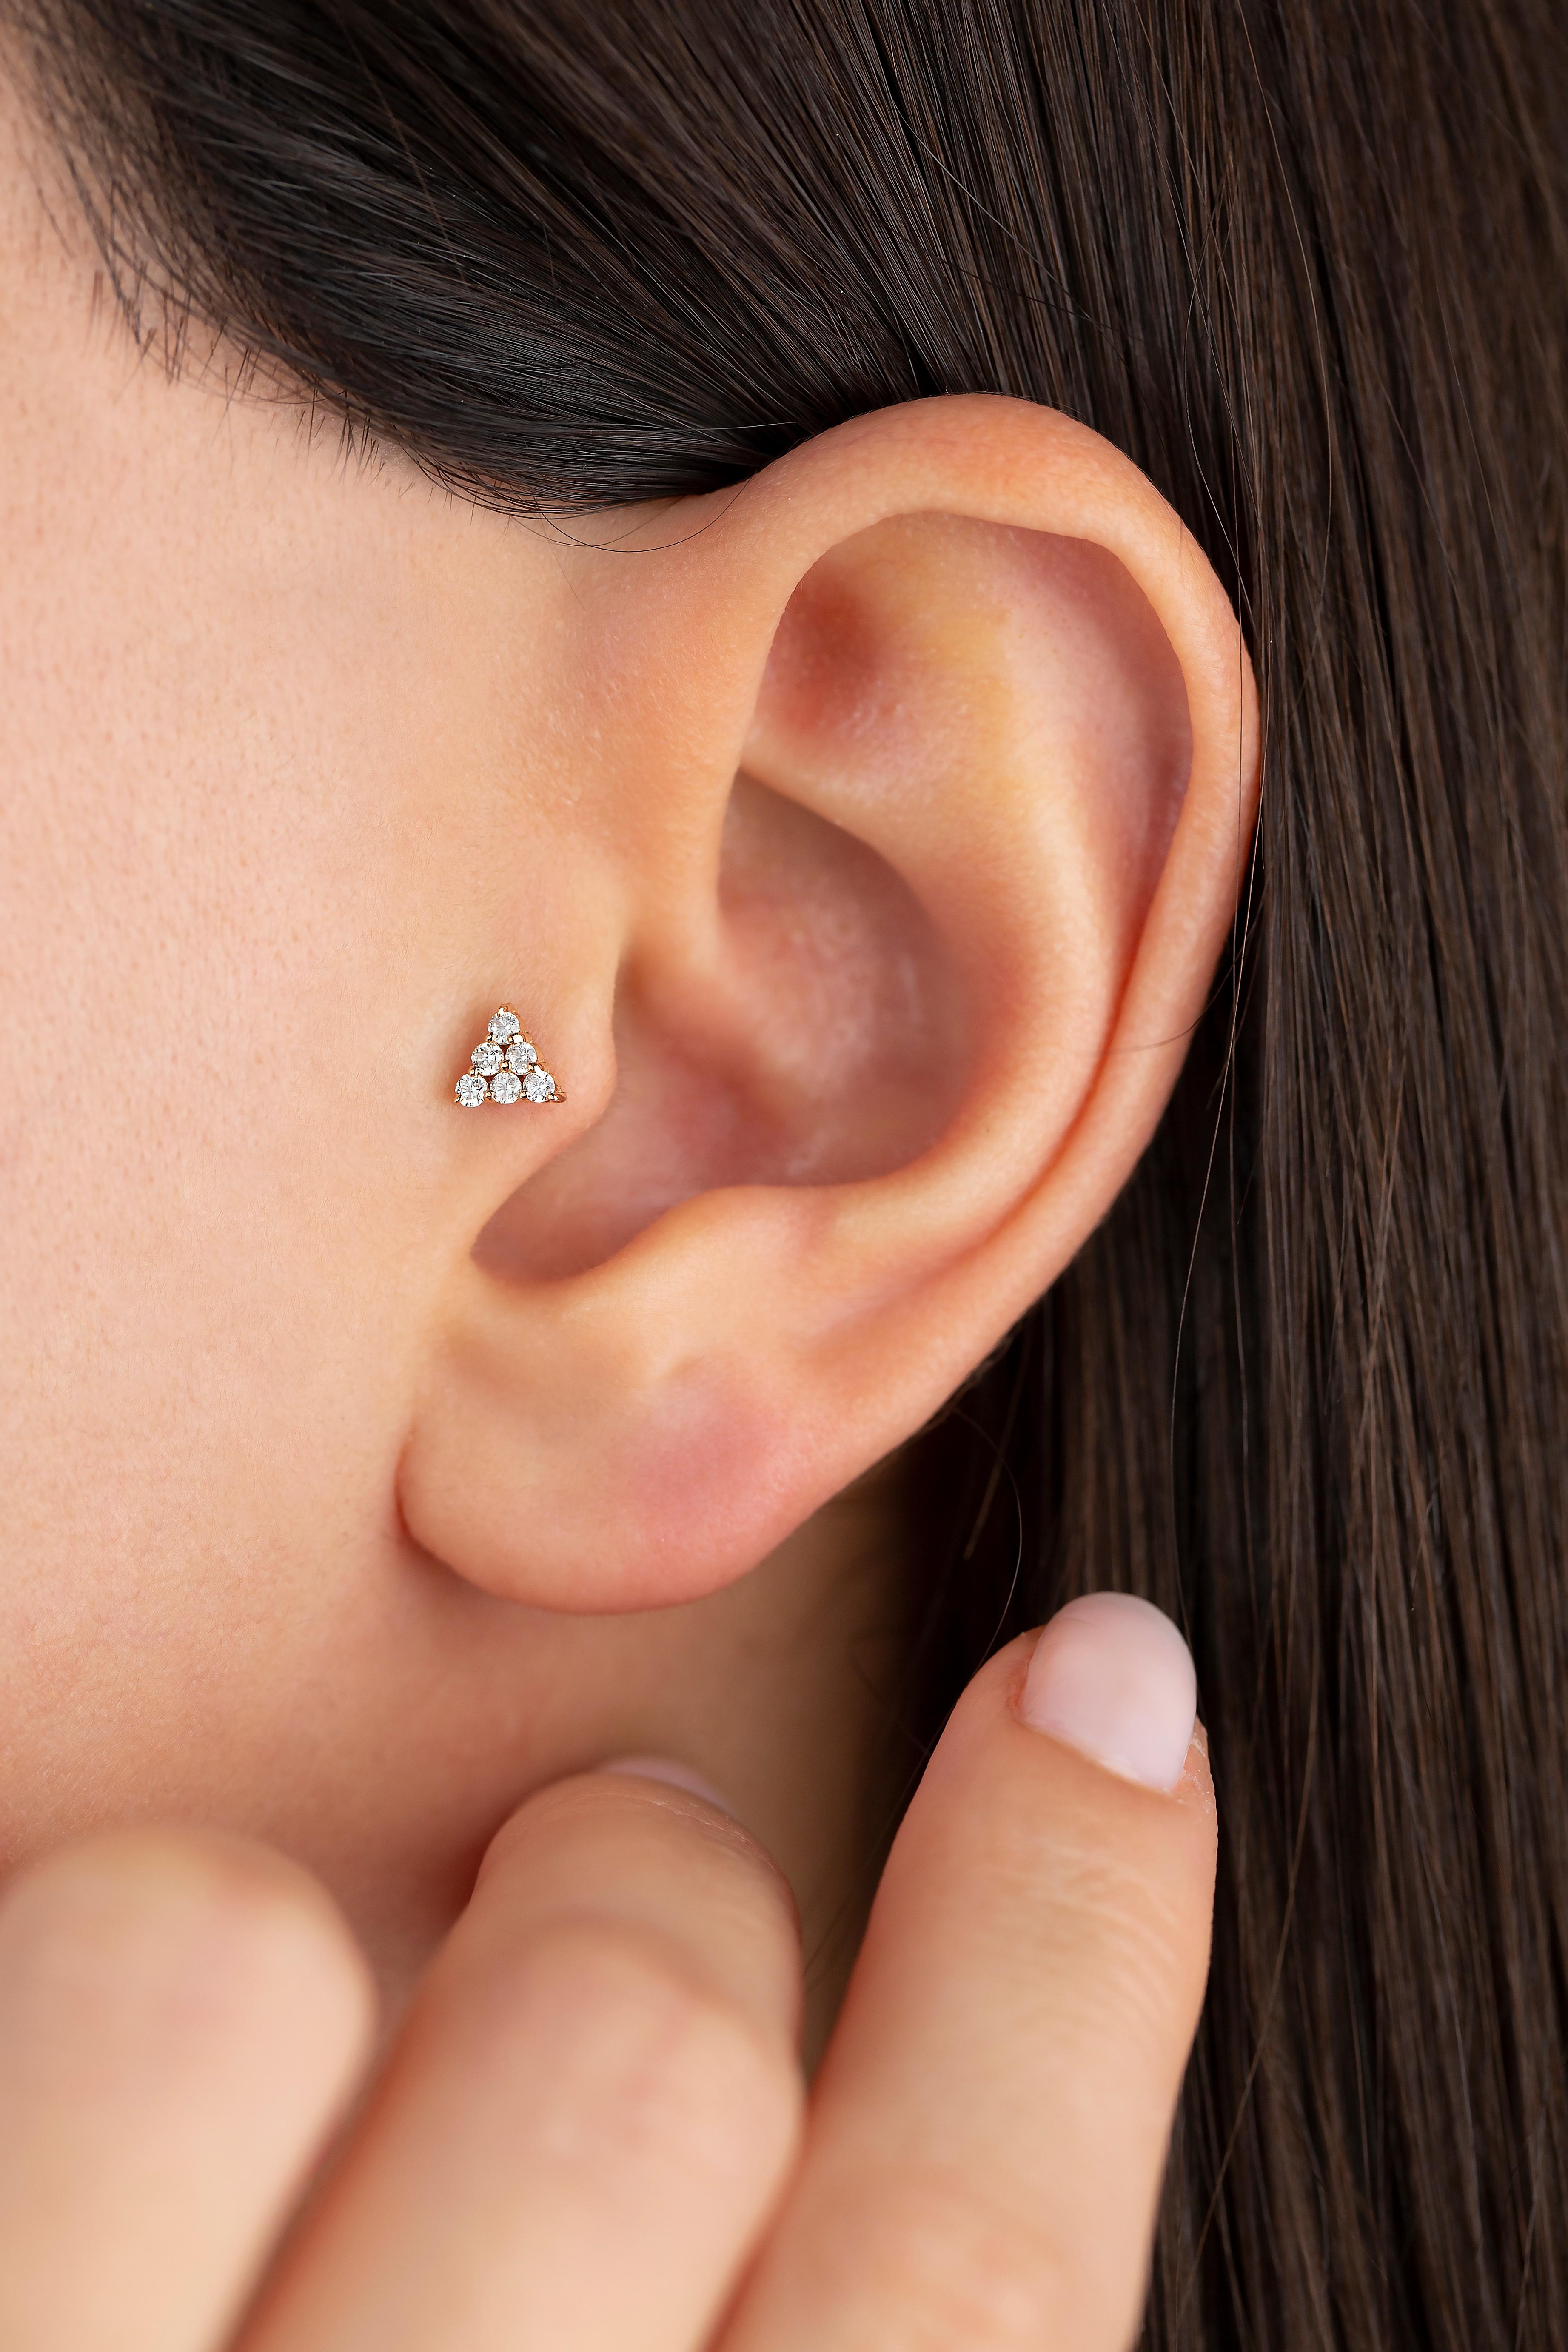 14K Gold 0.07 Ct Diamond Triangle Piercing Gold 0.07 ct Diamond Trigon Earring

You can use the piercing as an earring too! Also this piercing is suitable for tragus, nose, helix, lobe, flat, medusa, monreo, labret and stud.

This piercing was made